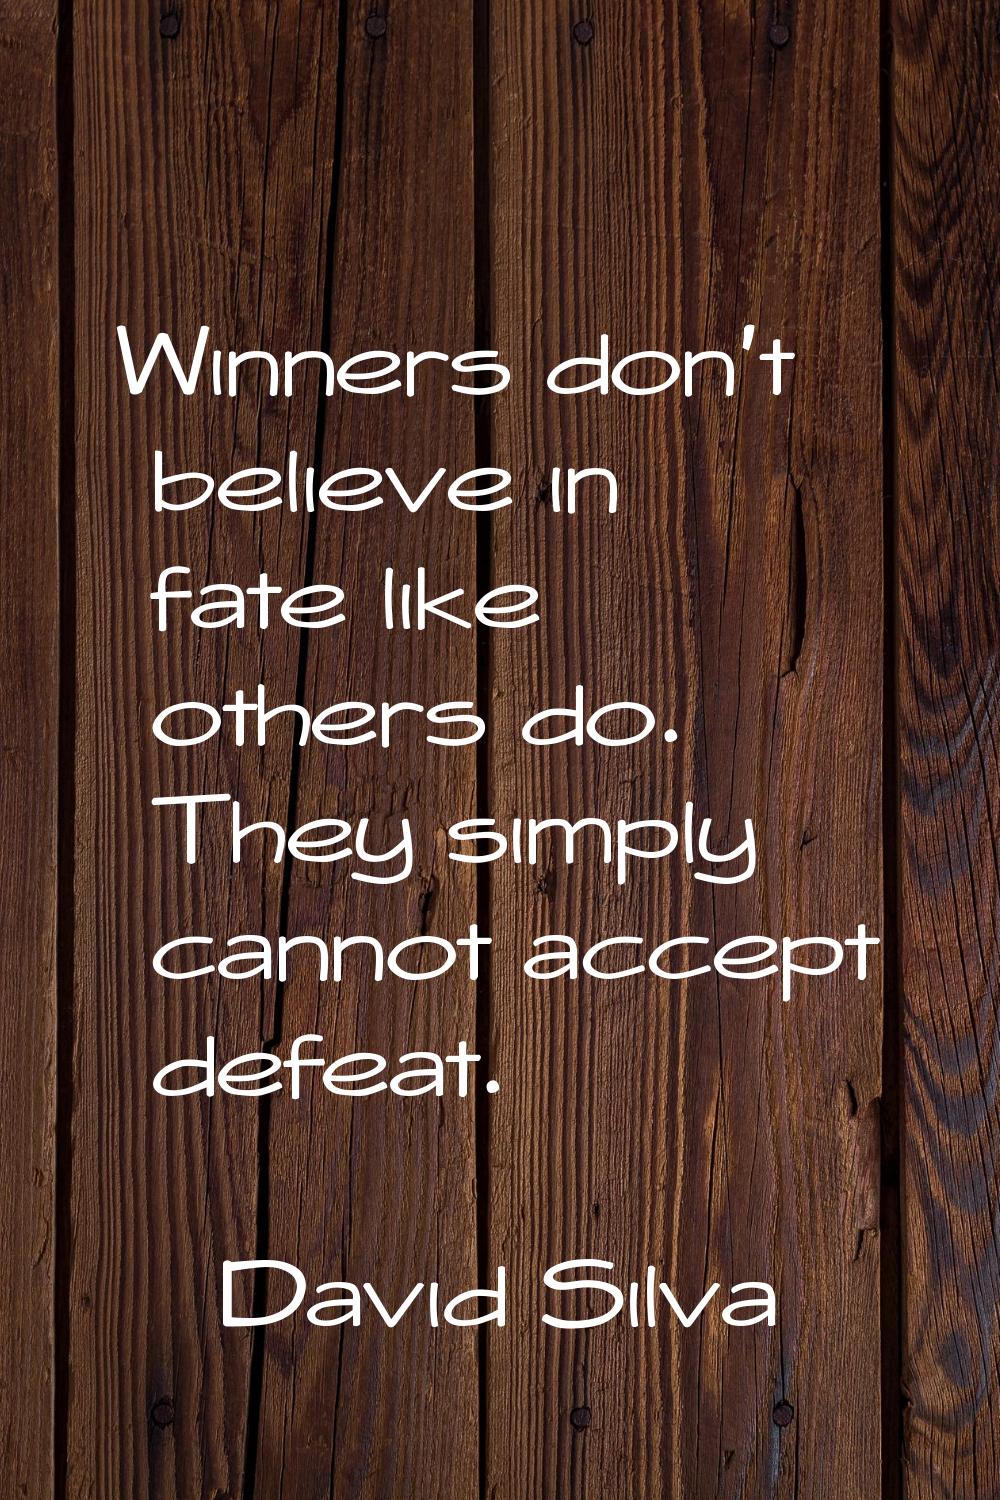 Winners don't believe in fate like others do. They simply cannot accept defeat.